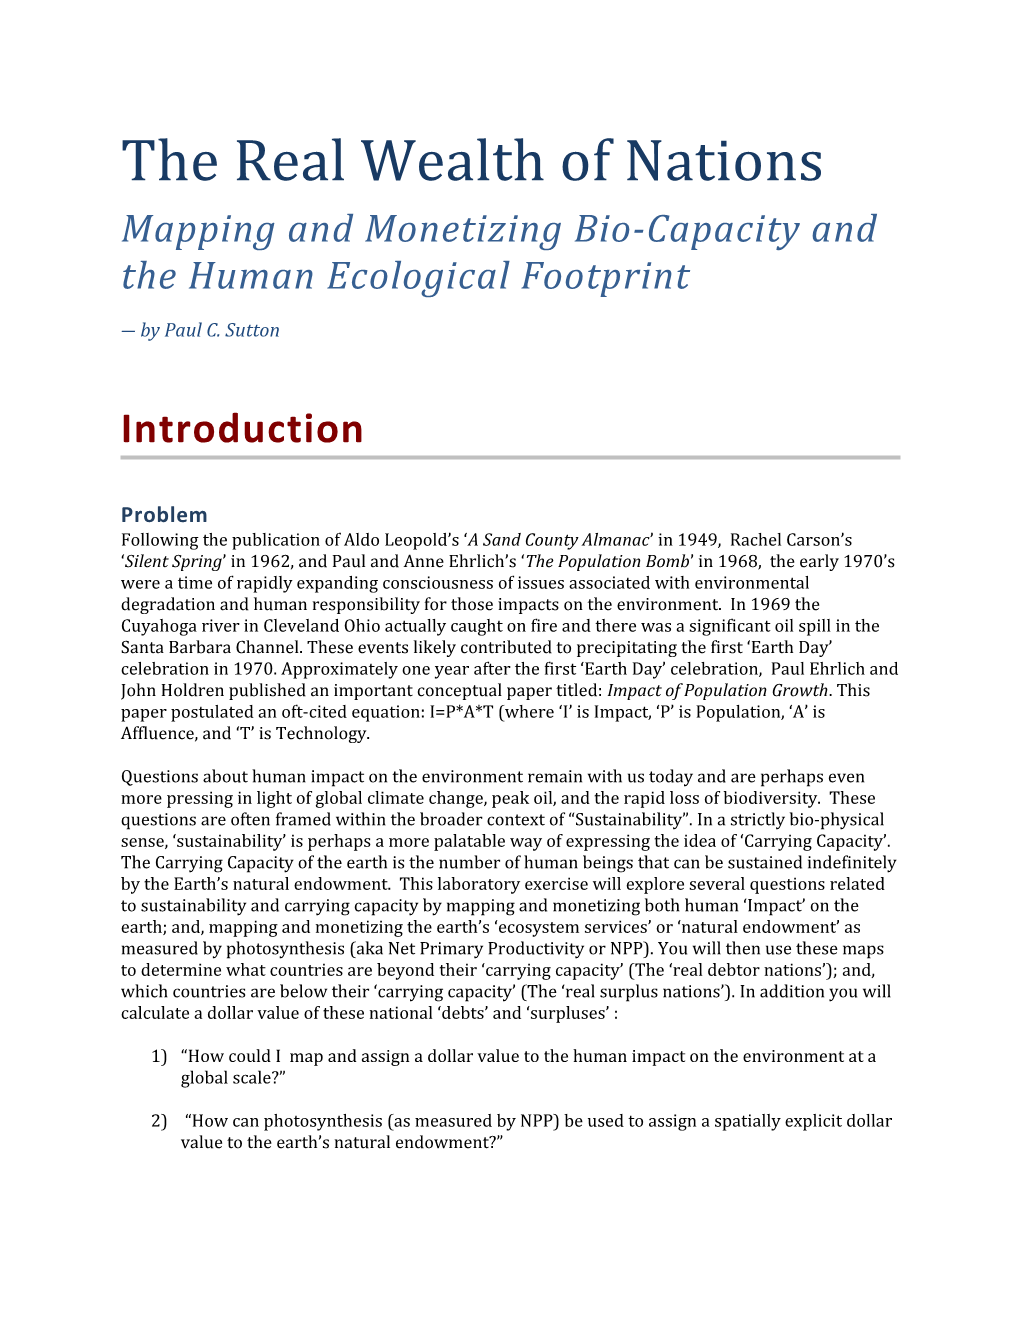 The Real Wealth of Nationspaul Sutton